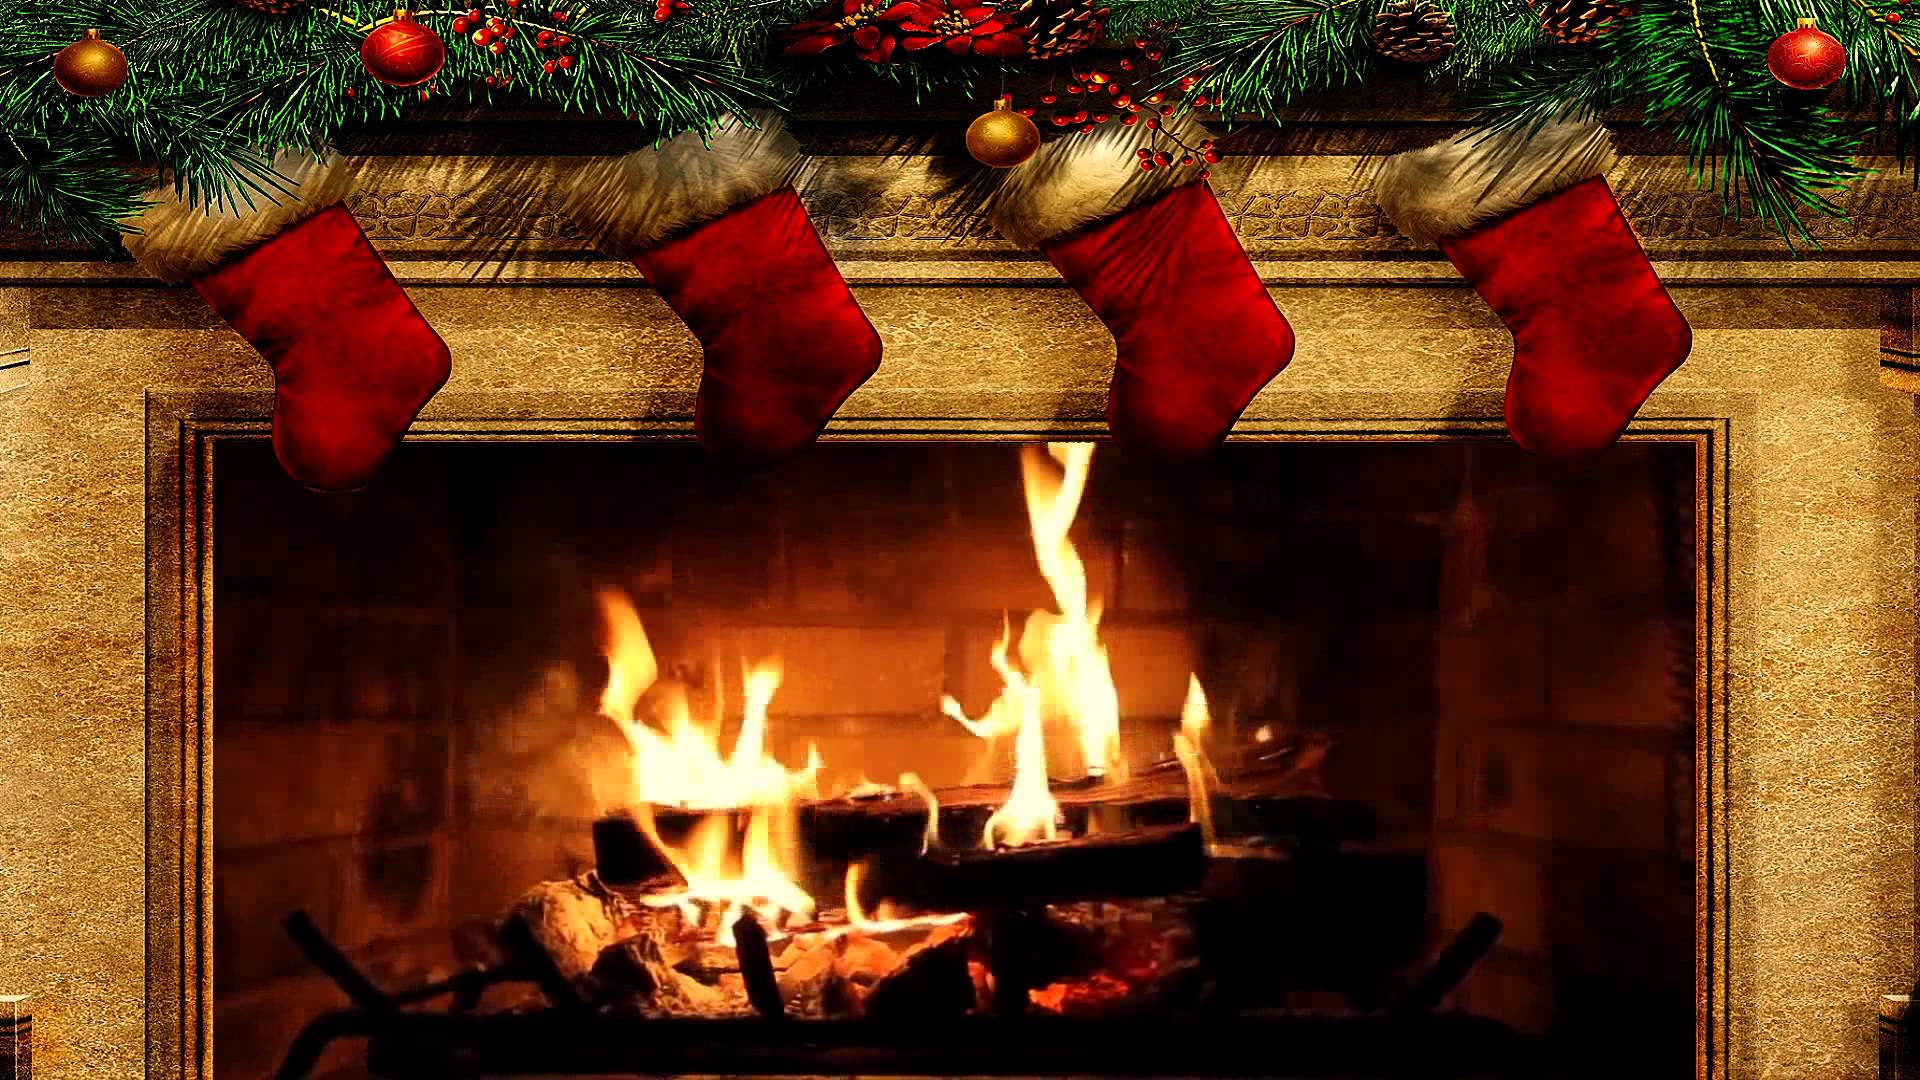 Merry Christmas Fireplace with Crackling Fire Sounds (HD) - YouTube